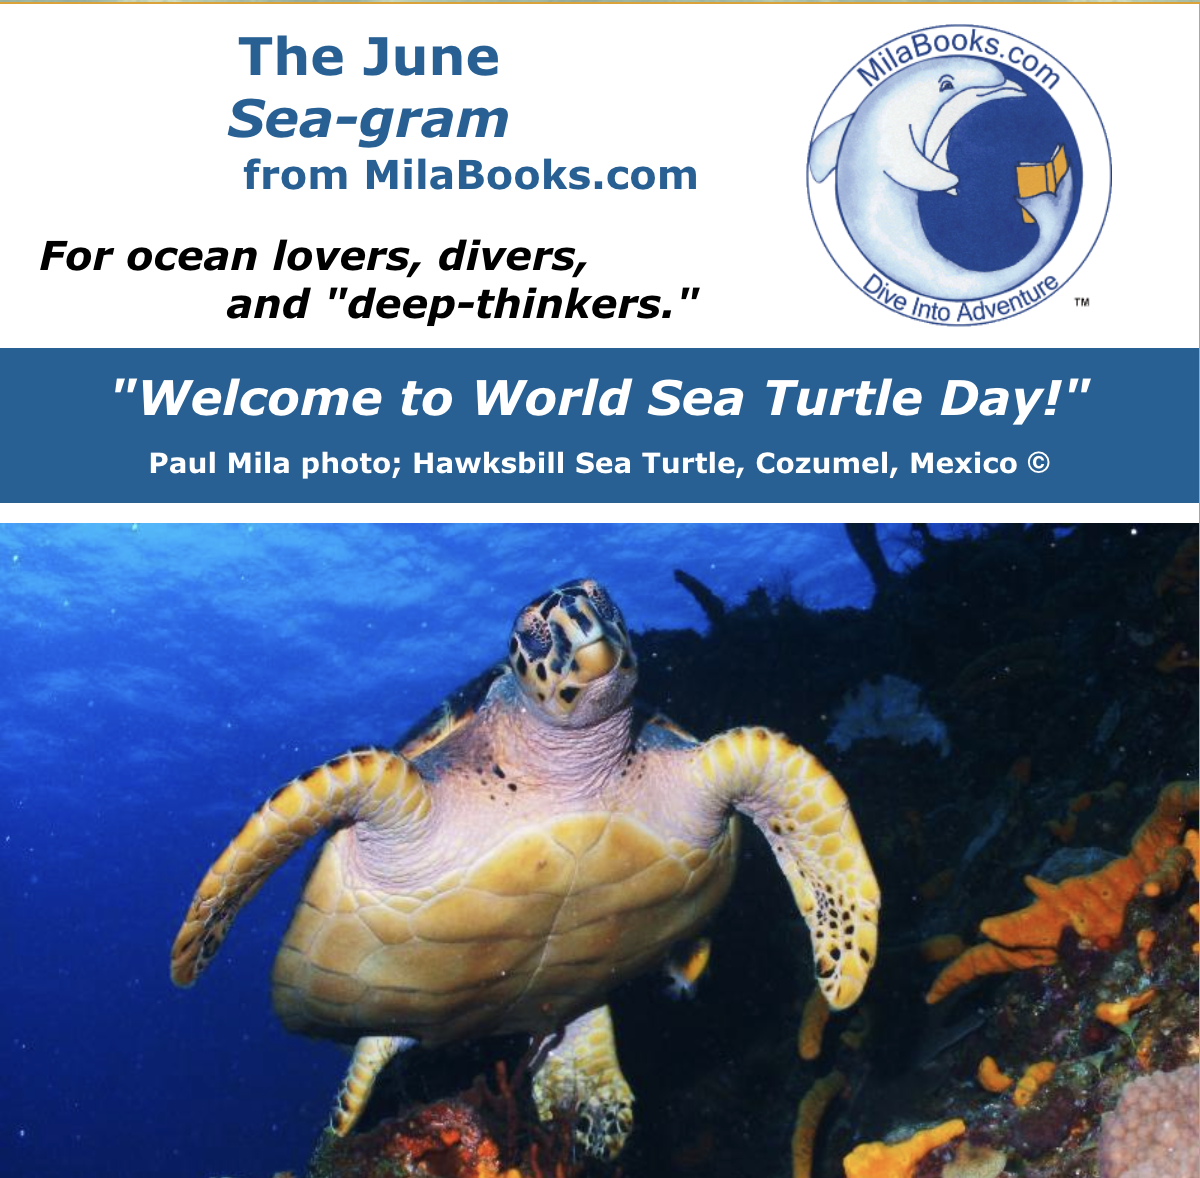 Welcome to the June 2022 Sea-gram, from MilaBooks.comThis month we're featuring sea turtles as we celebrate World Sea Turtle Day, June 16th. Lot...